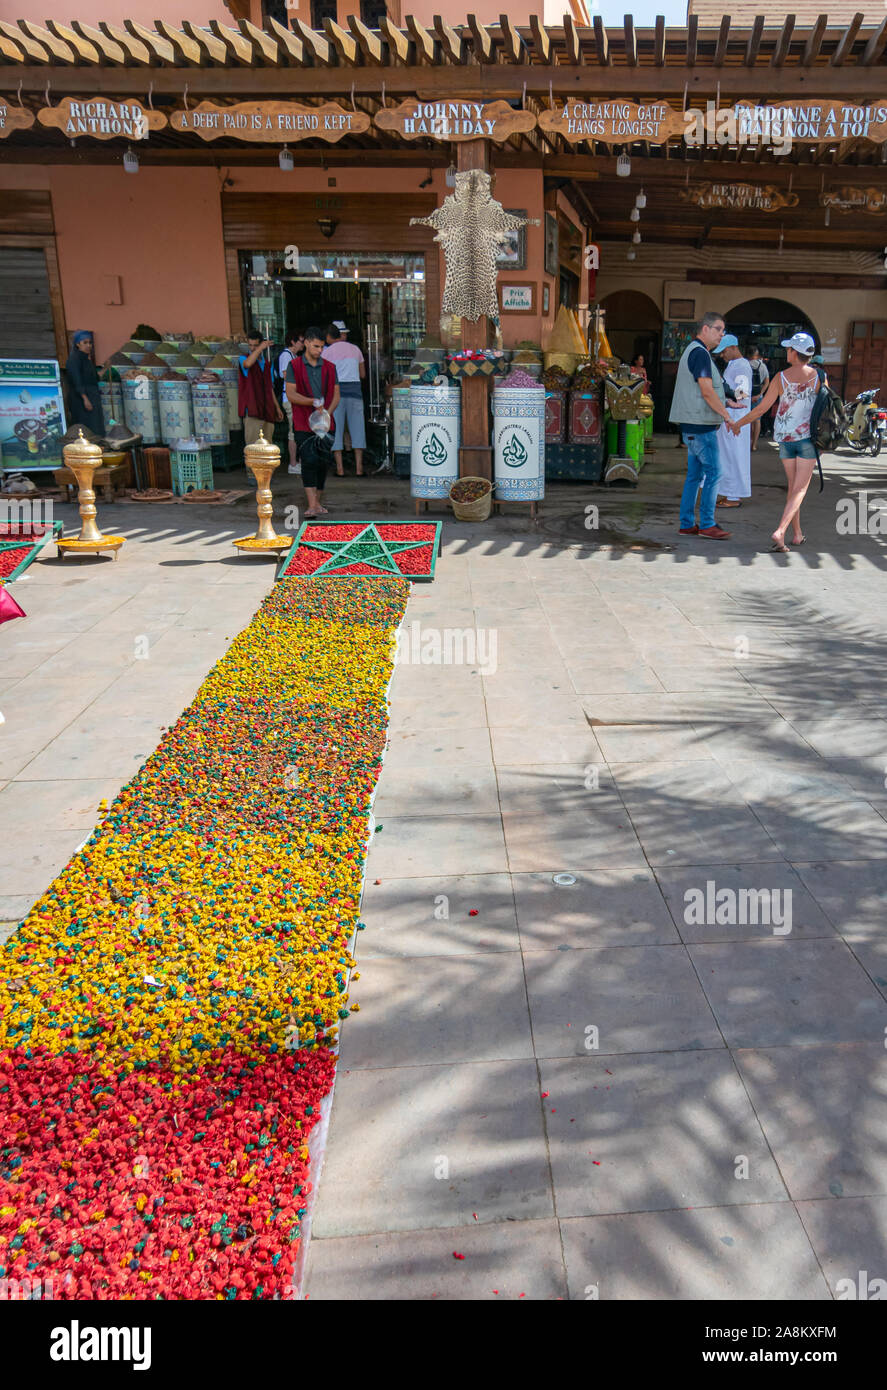 Carpet of flowers in a square in Marrakech. Morocco, in October 2019 Stock Photo